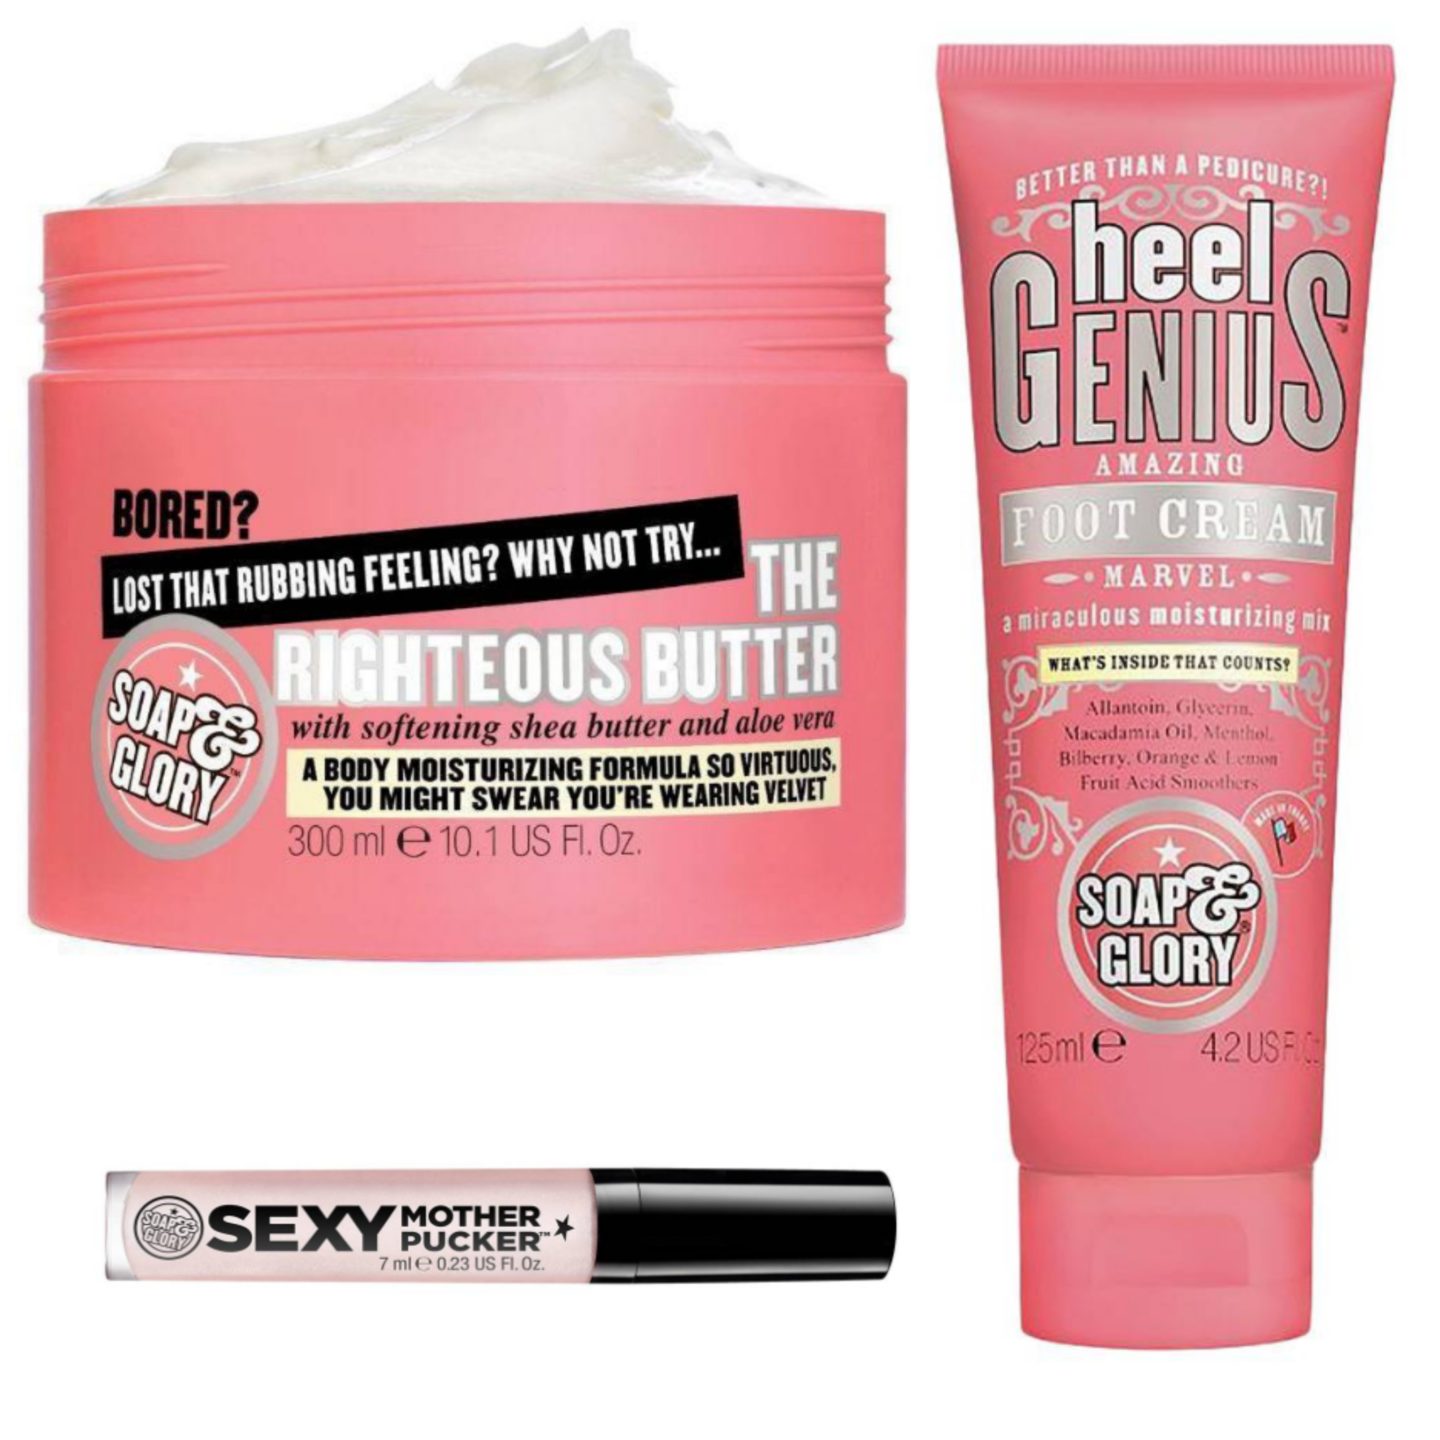 Soap & Glory Product Review on Belle Meets World blog